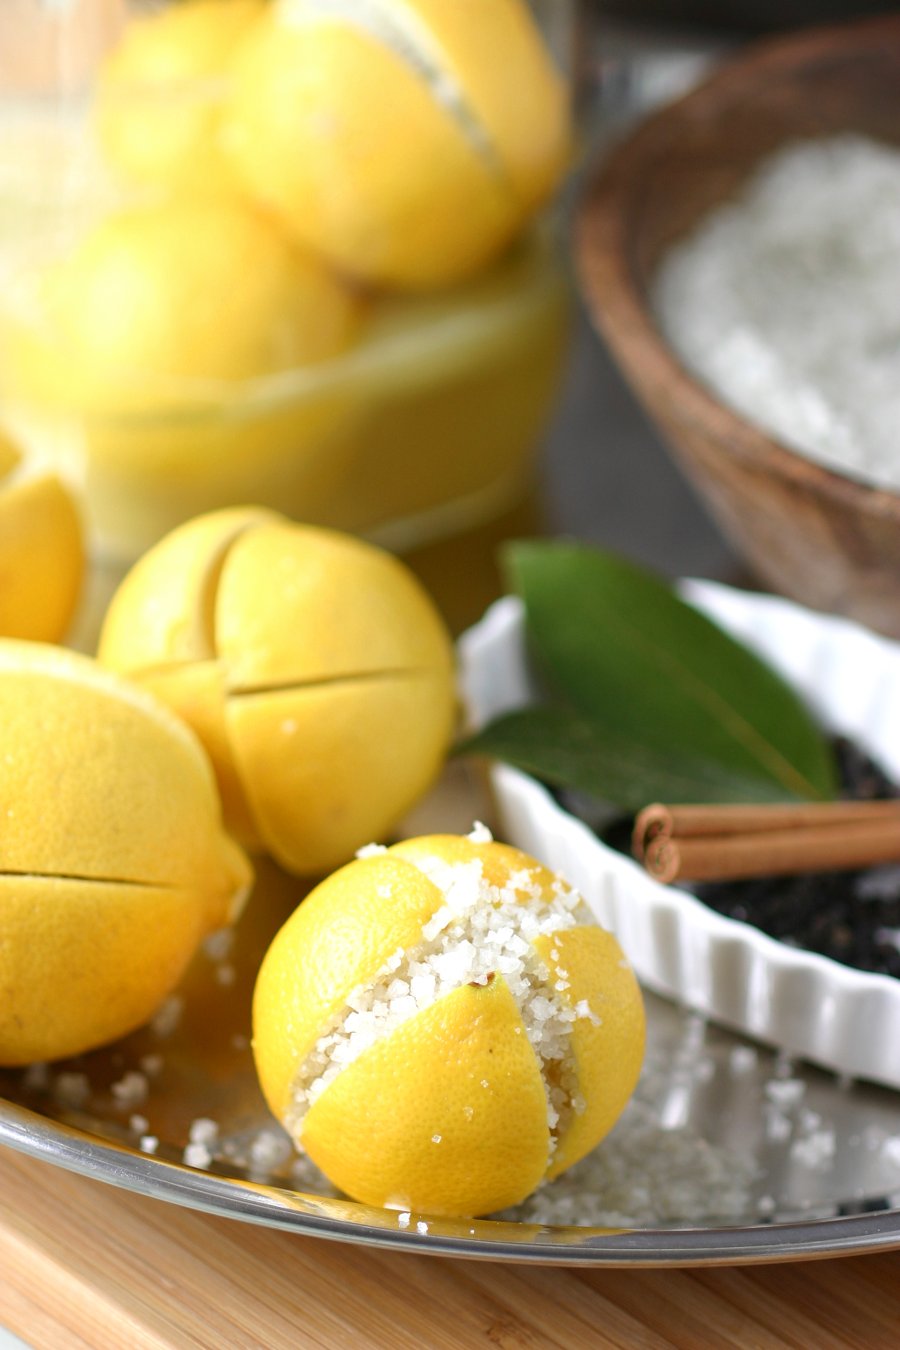 Give your favorite Moroccan and North African dishes that zesty, authentic taste with this really easy recipe for Homemade Preserved Lemons!